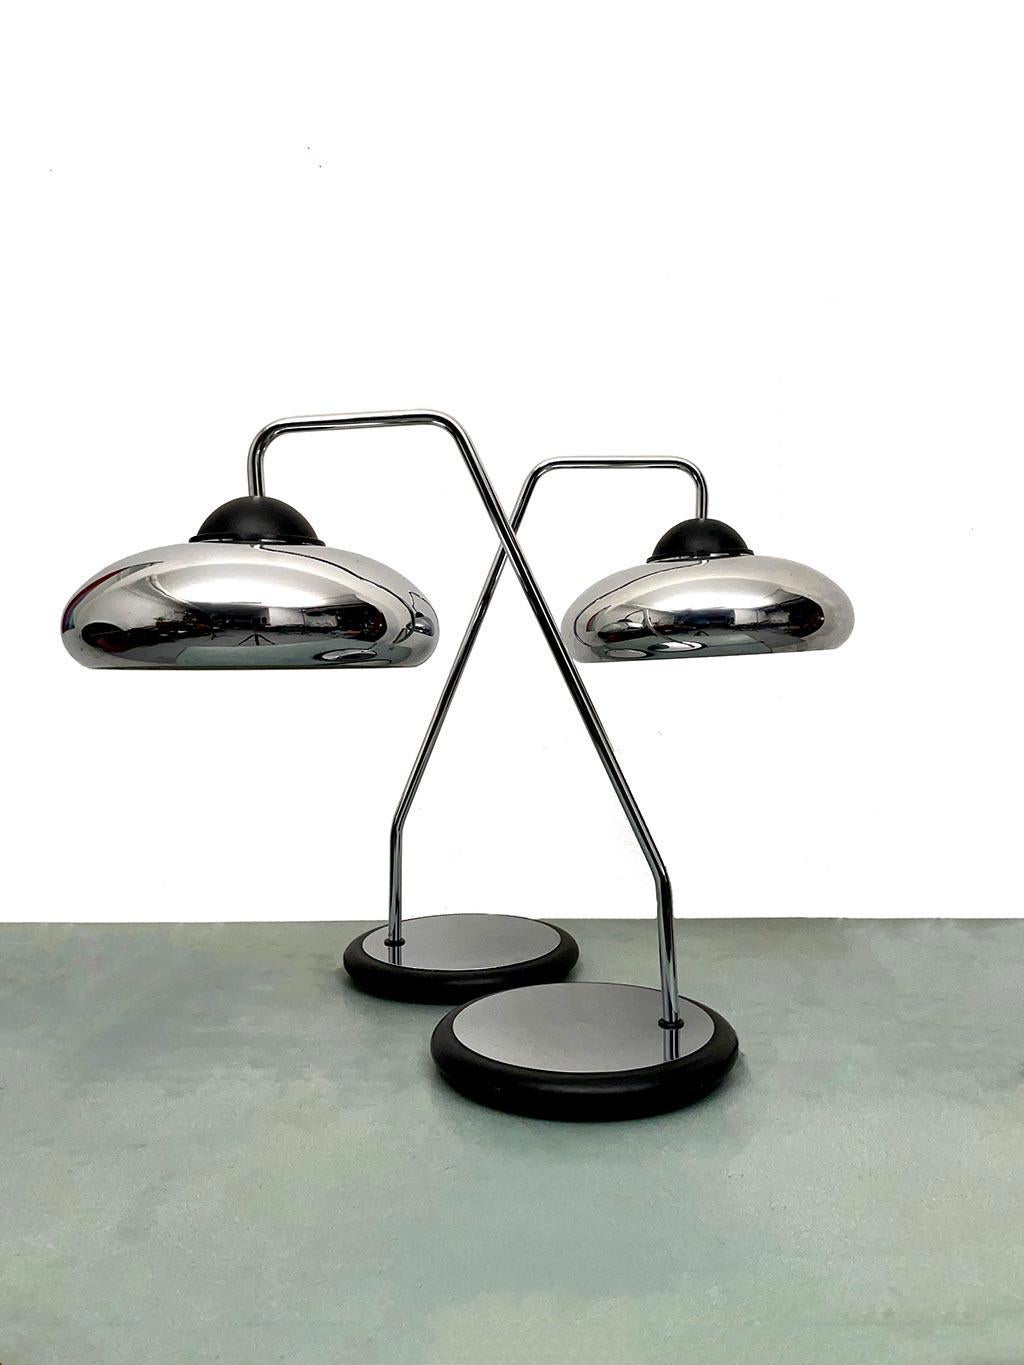 Rare pair of table lamps mod. 2101 Ministeriale produced by Stilnovo. Swiveling lampshade made of pressed sheet metal, chromed bent tubular stem and cast iron base covered with black lacquered sheet metal casing with chromed plate. Documentation